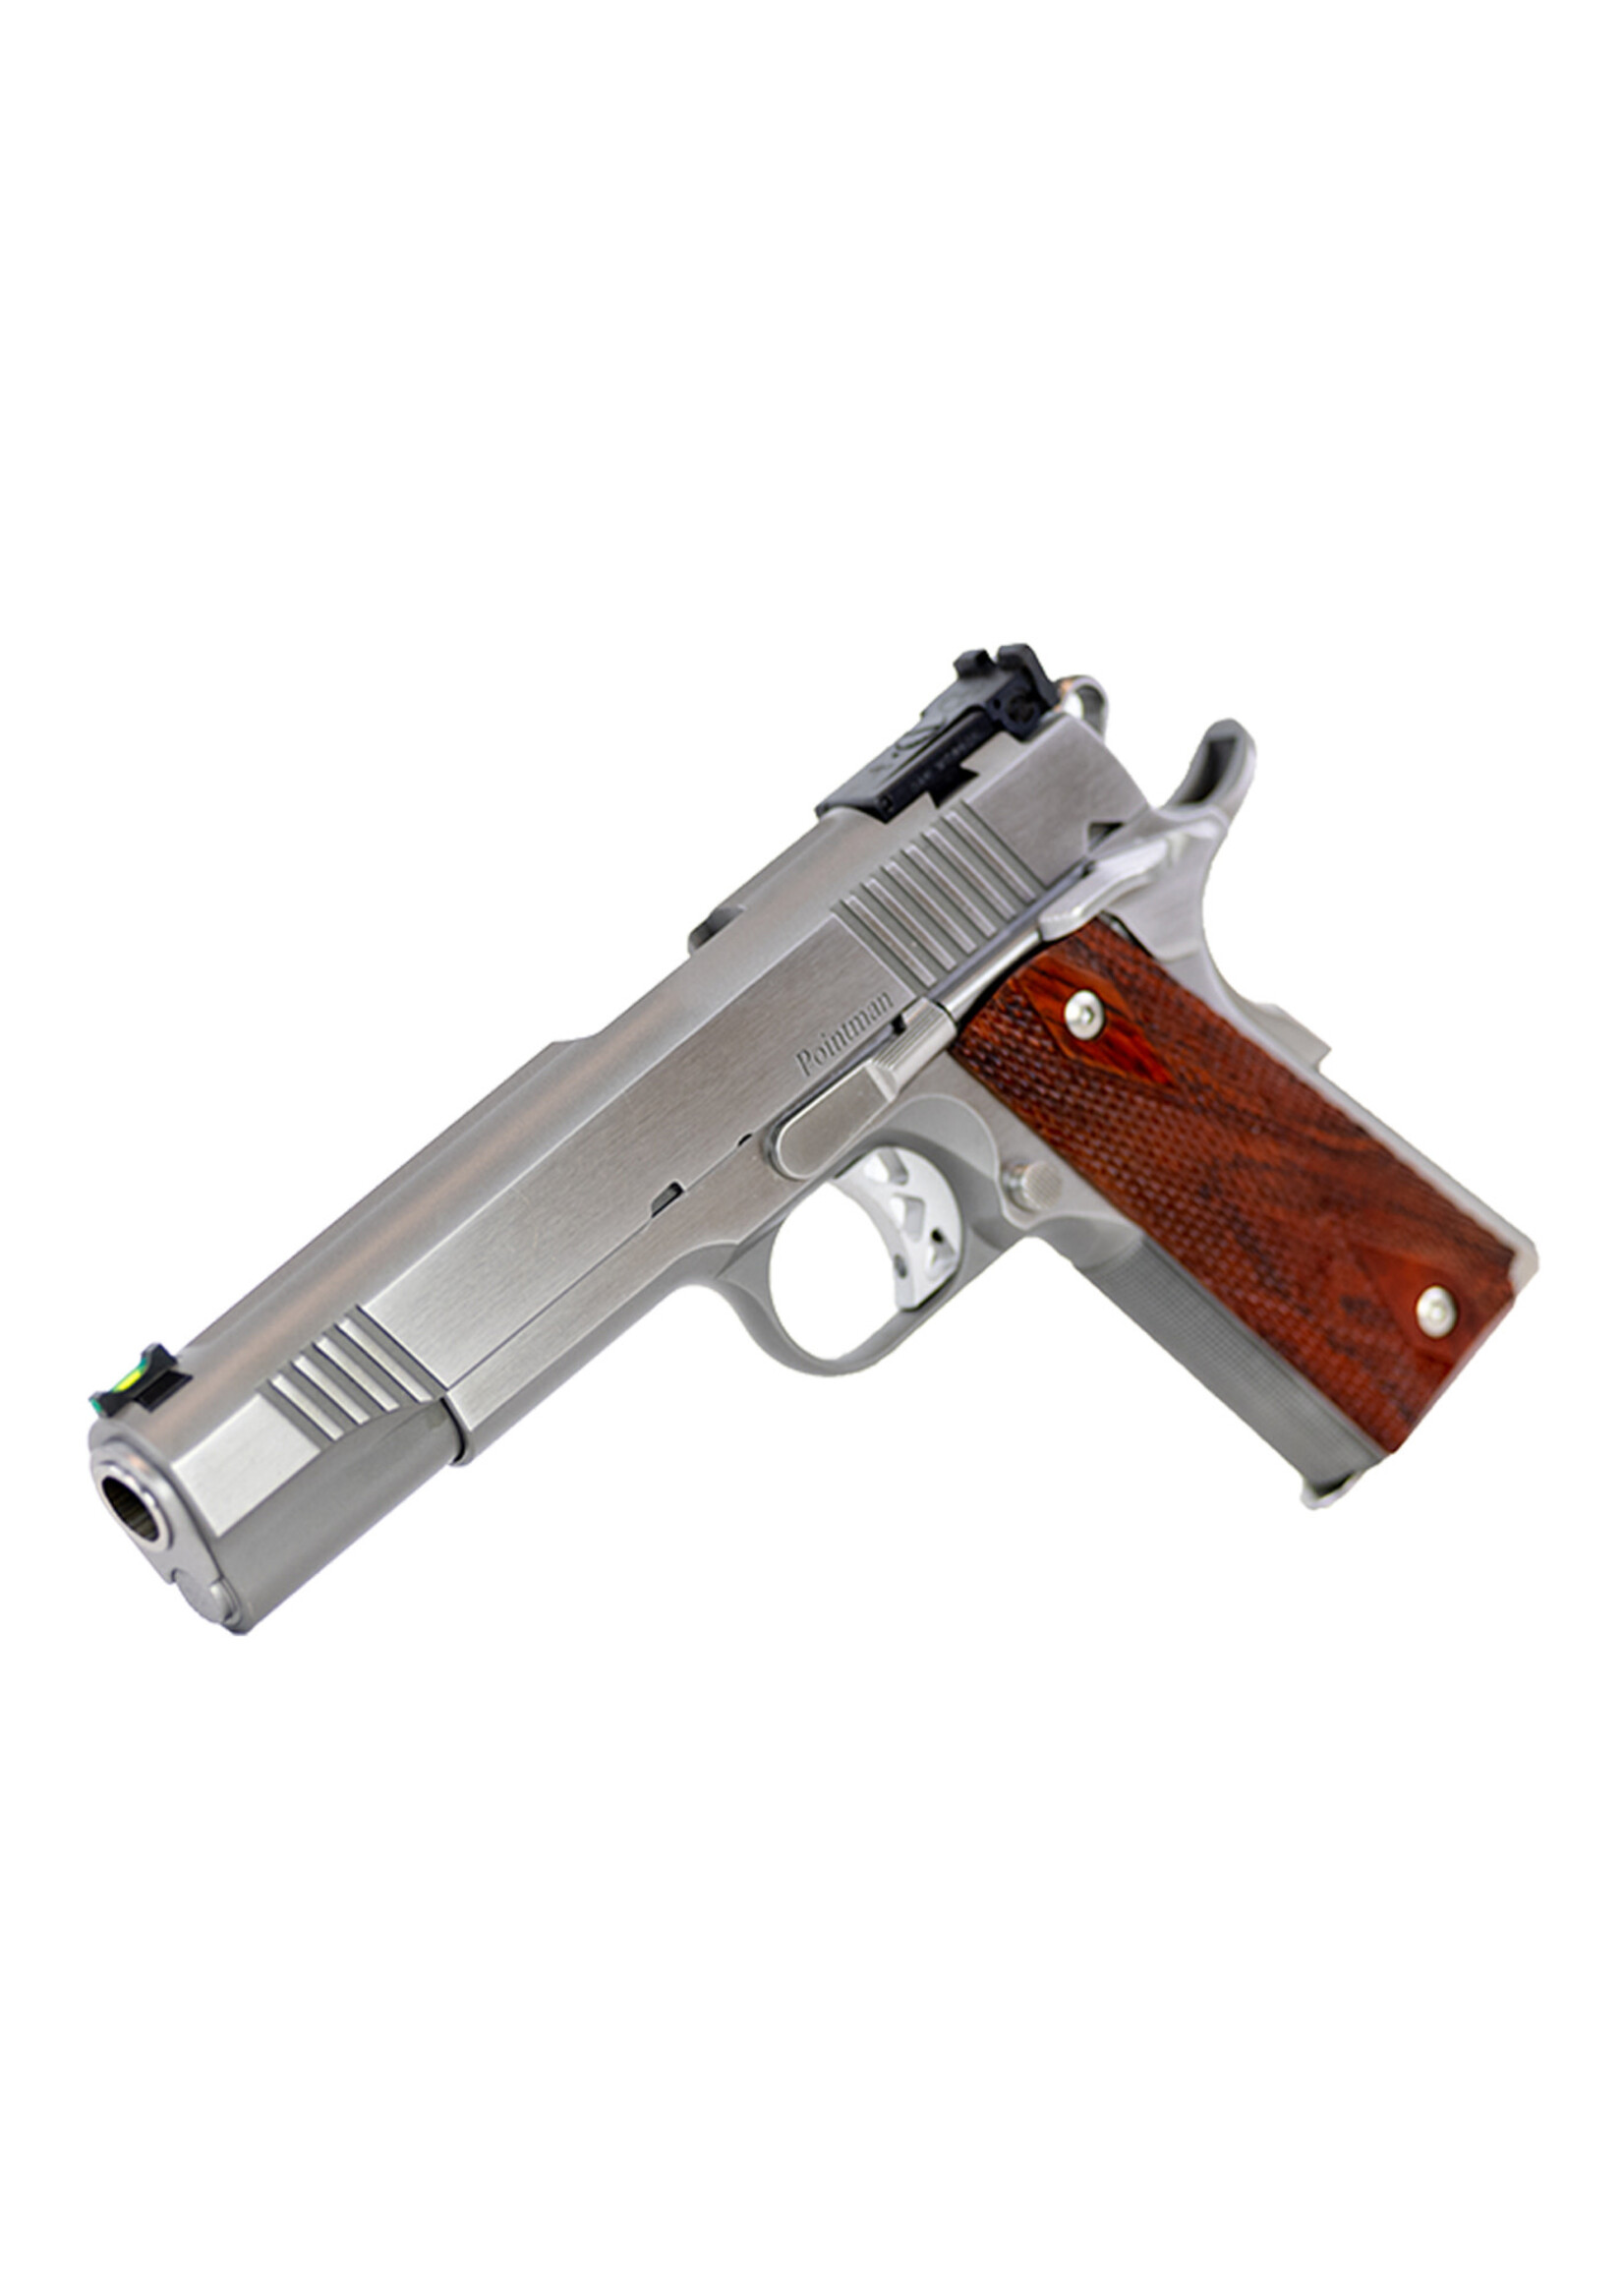 CZ USA / Dan Wesson Dan Wesson 01942 Pointman Nine 9mm Luger 9+1 5" Barrel, Forged Stainless Steel Frame w/Beavertail & Undercut Trigger Guard, Front & Rear Serrated Stainless Steel Slide, Brushed Finish, Double Diamond Cocobolo Grip, Includes 2 Magazines